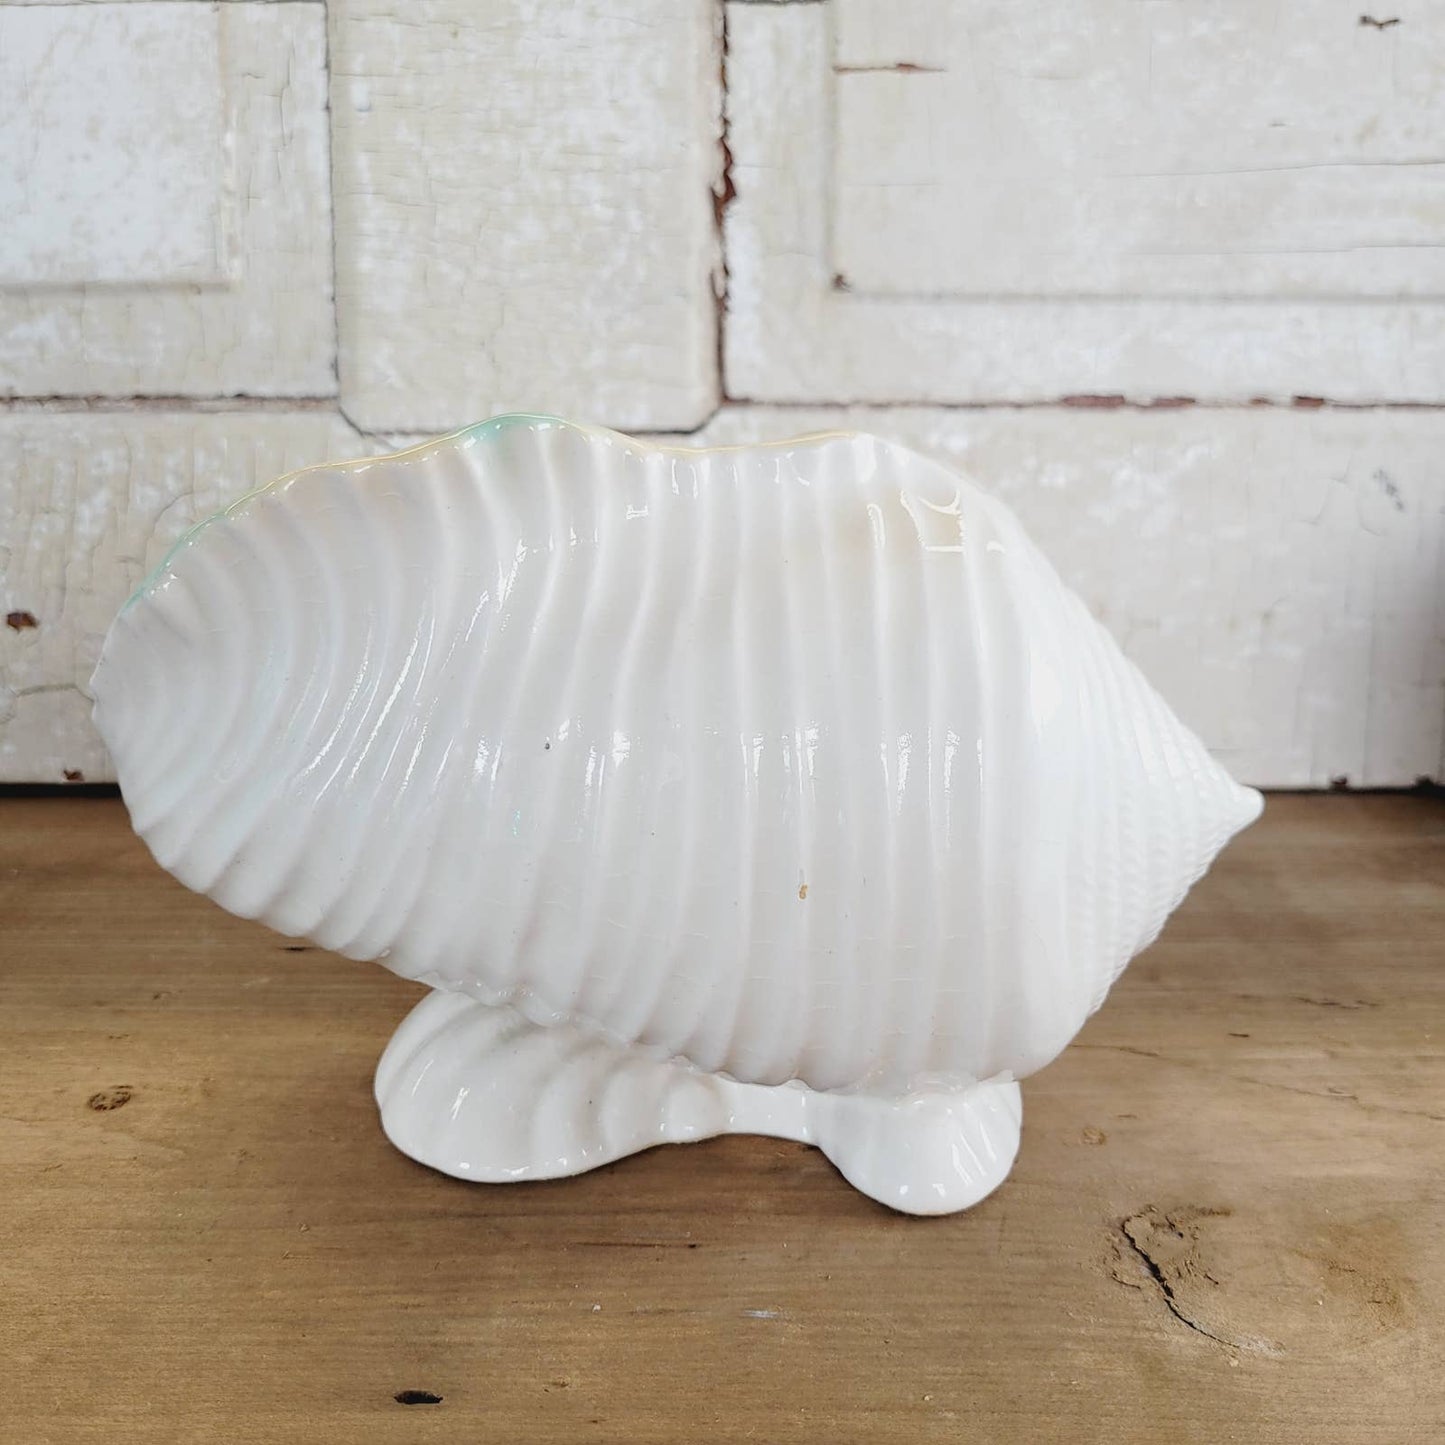 Roseville Ming Tree Conch Shell Planter